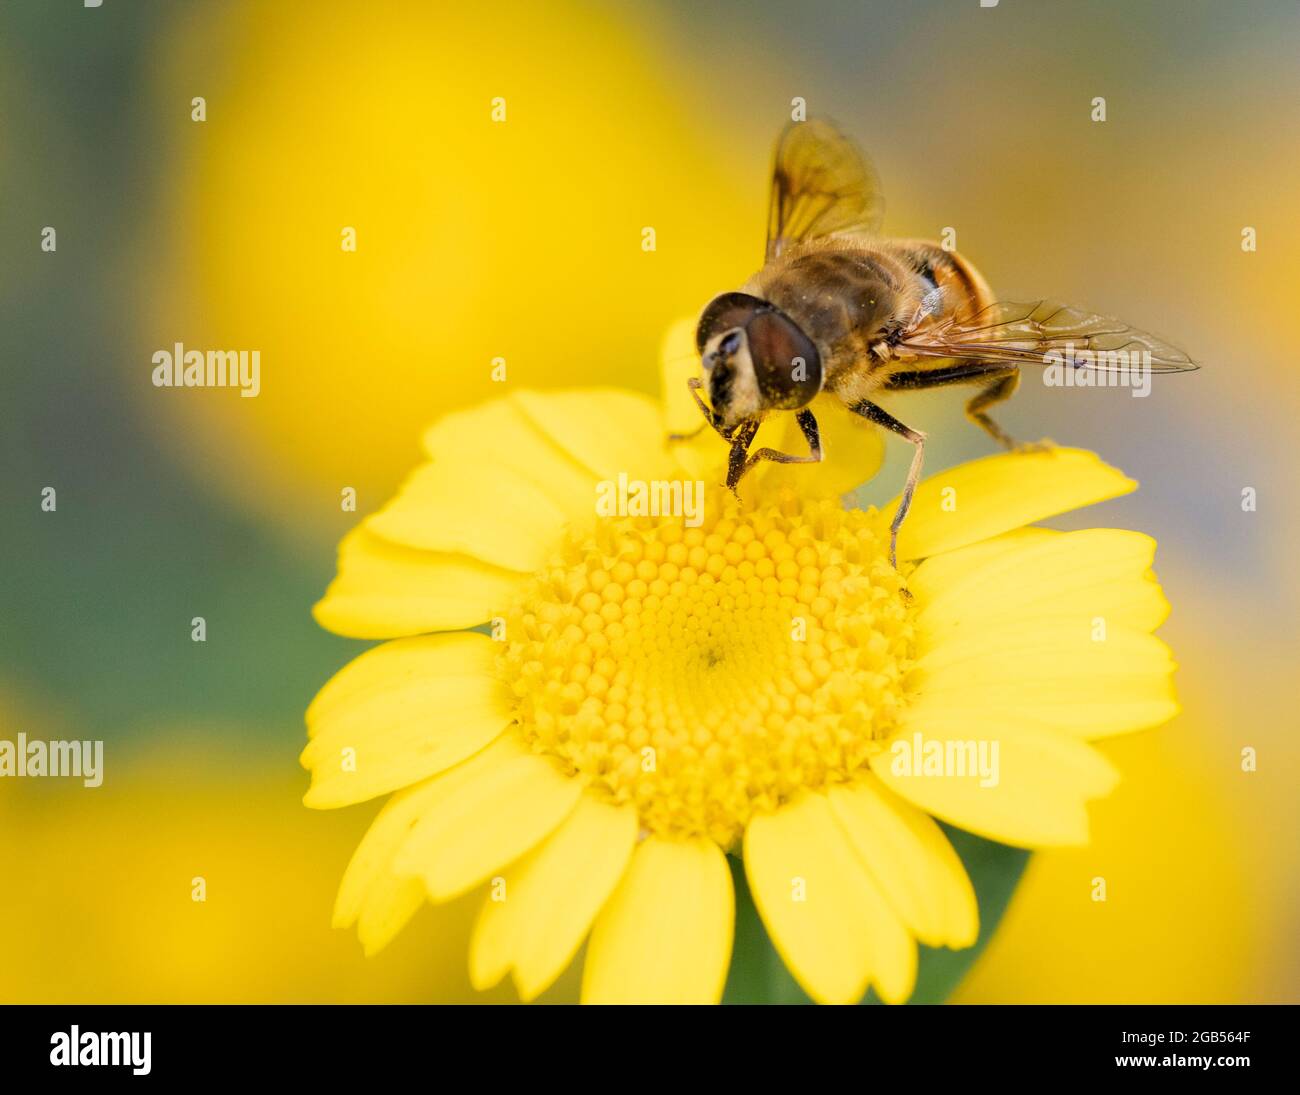 Hoverfly, Hover Fly, perched on a yellow flower in a British Garden, Summer 2021 Stock Photo